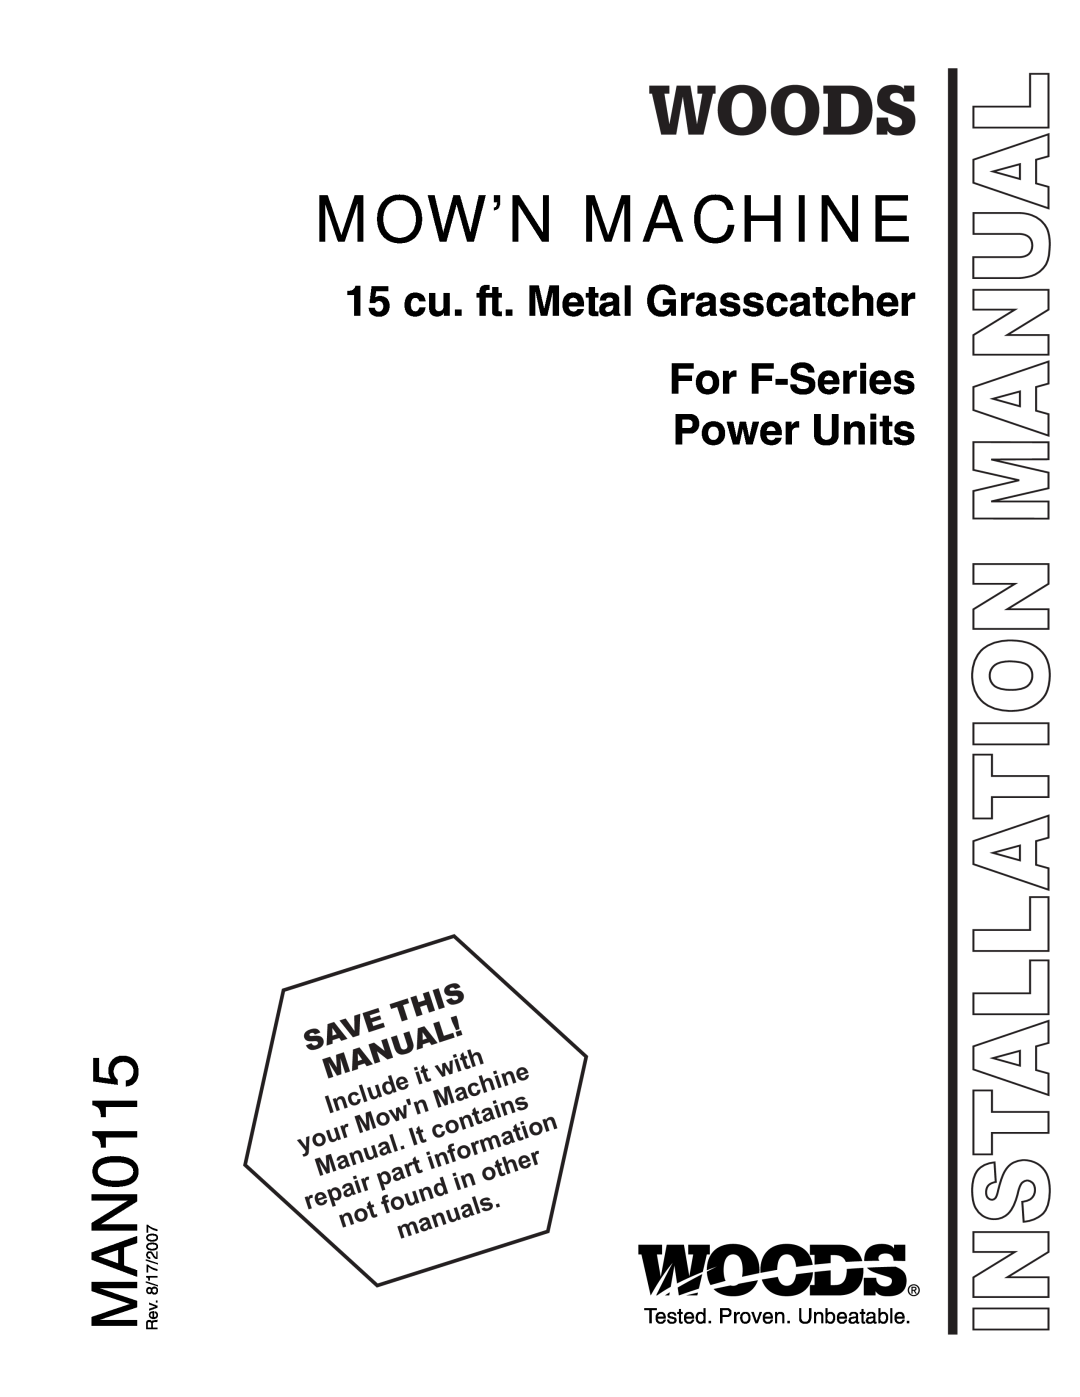 Woods Equipment MAN0115 installation manual 15 cu. ft. Metal Grasscatcher For F-Series, Power Units, Mow’N Machine, This 